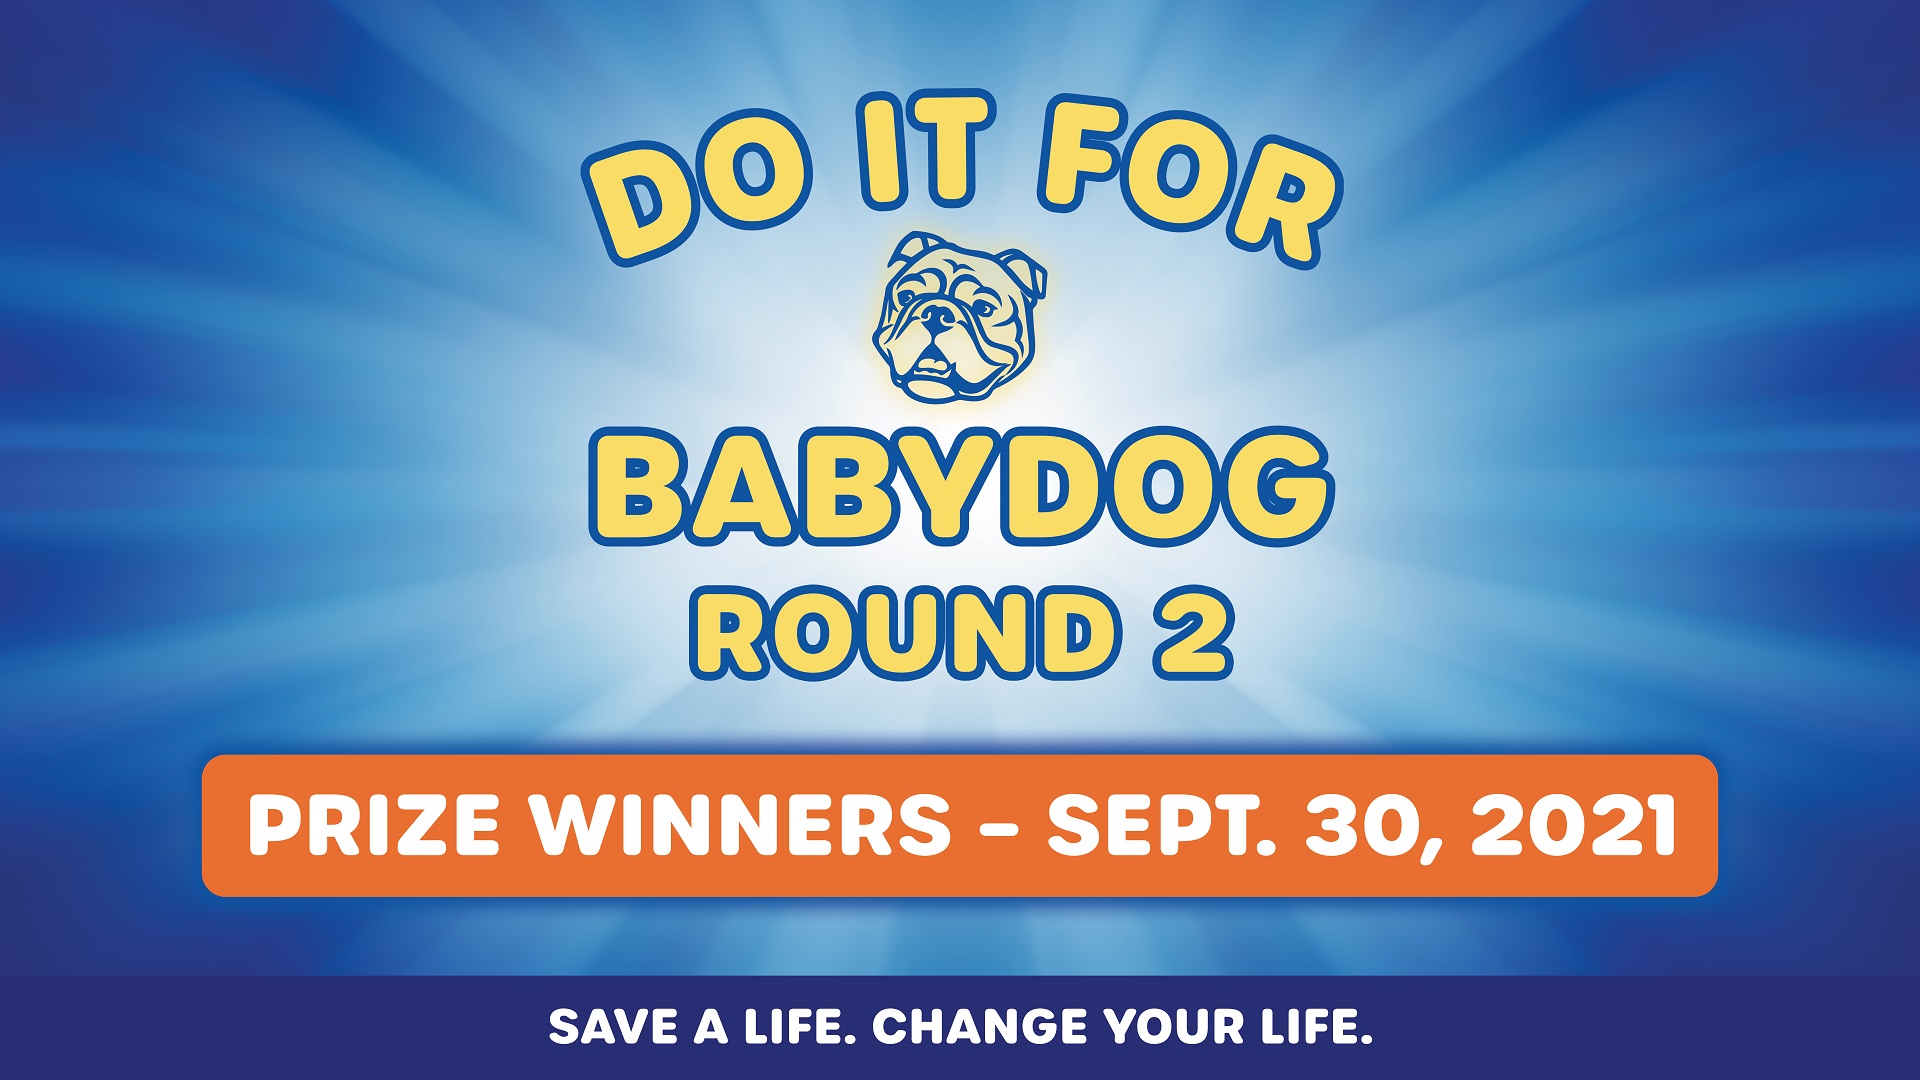 Do it for Babydog Round 2: Gov. Justice announces prize winners in vaccination sweepstakes – September 30, 2021 - Governor Jim Justice